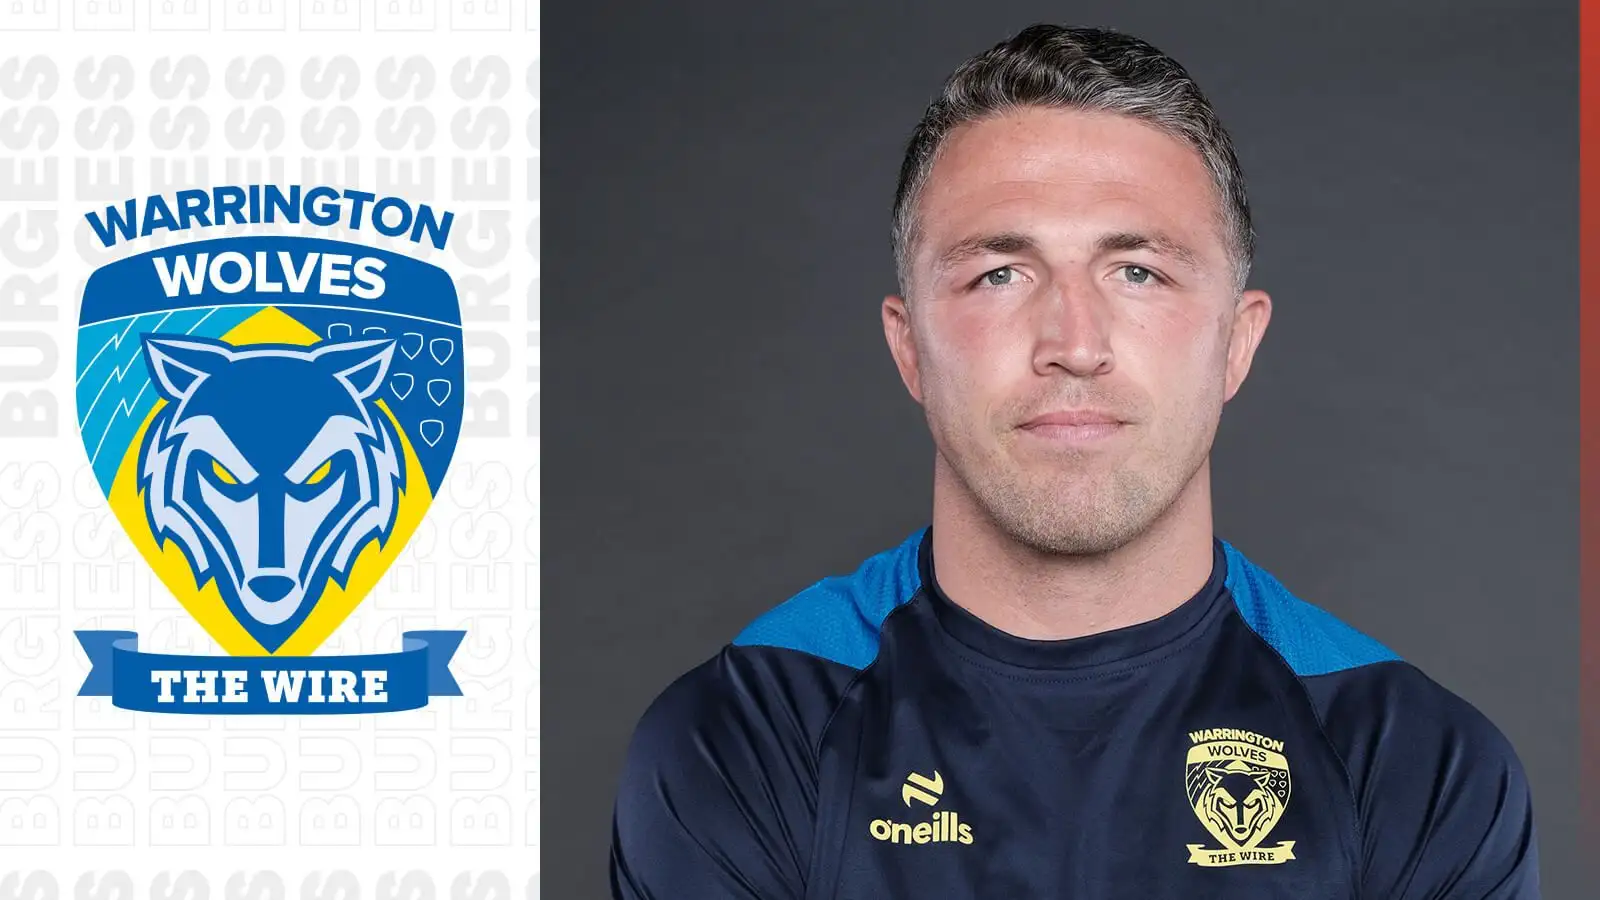 Warrington Wolves boss Sam Burgess highlights parallels with South Sydney Rabbitohs, picks out England’s ‘future captain’ & talks Wire’s cohesion